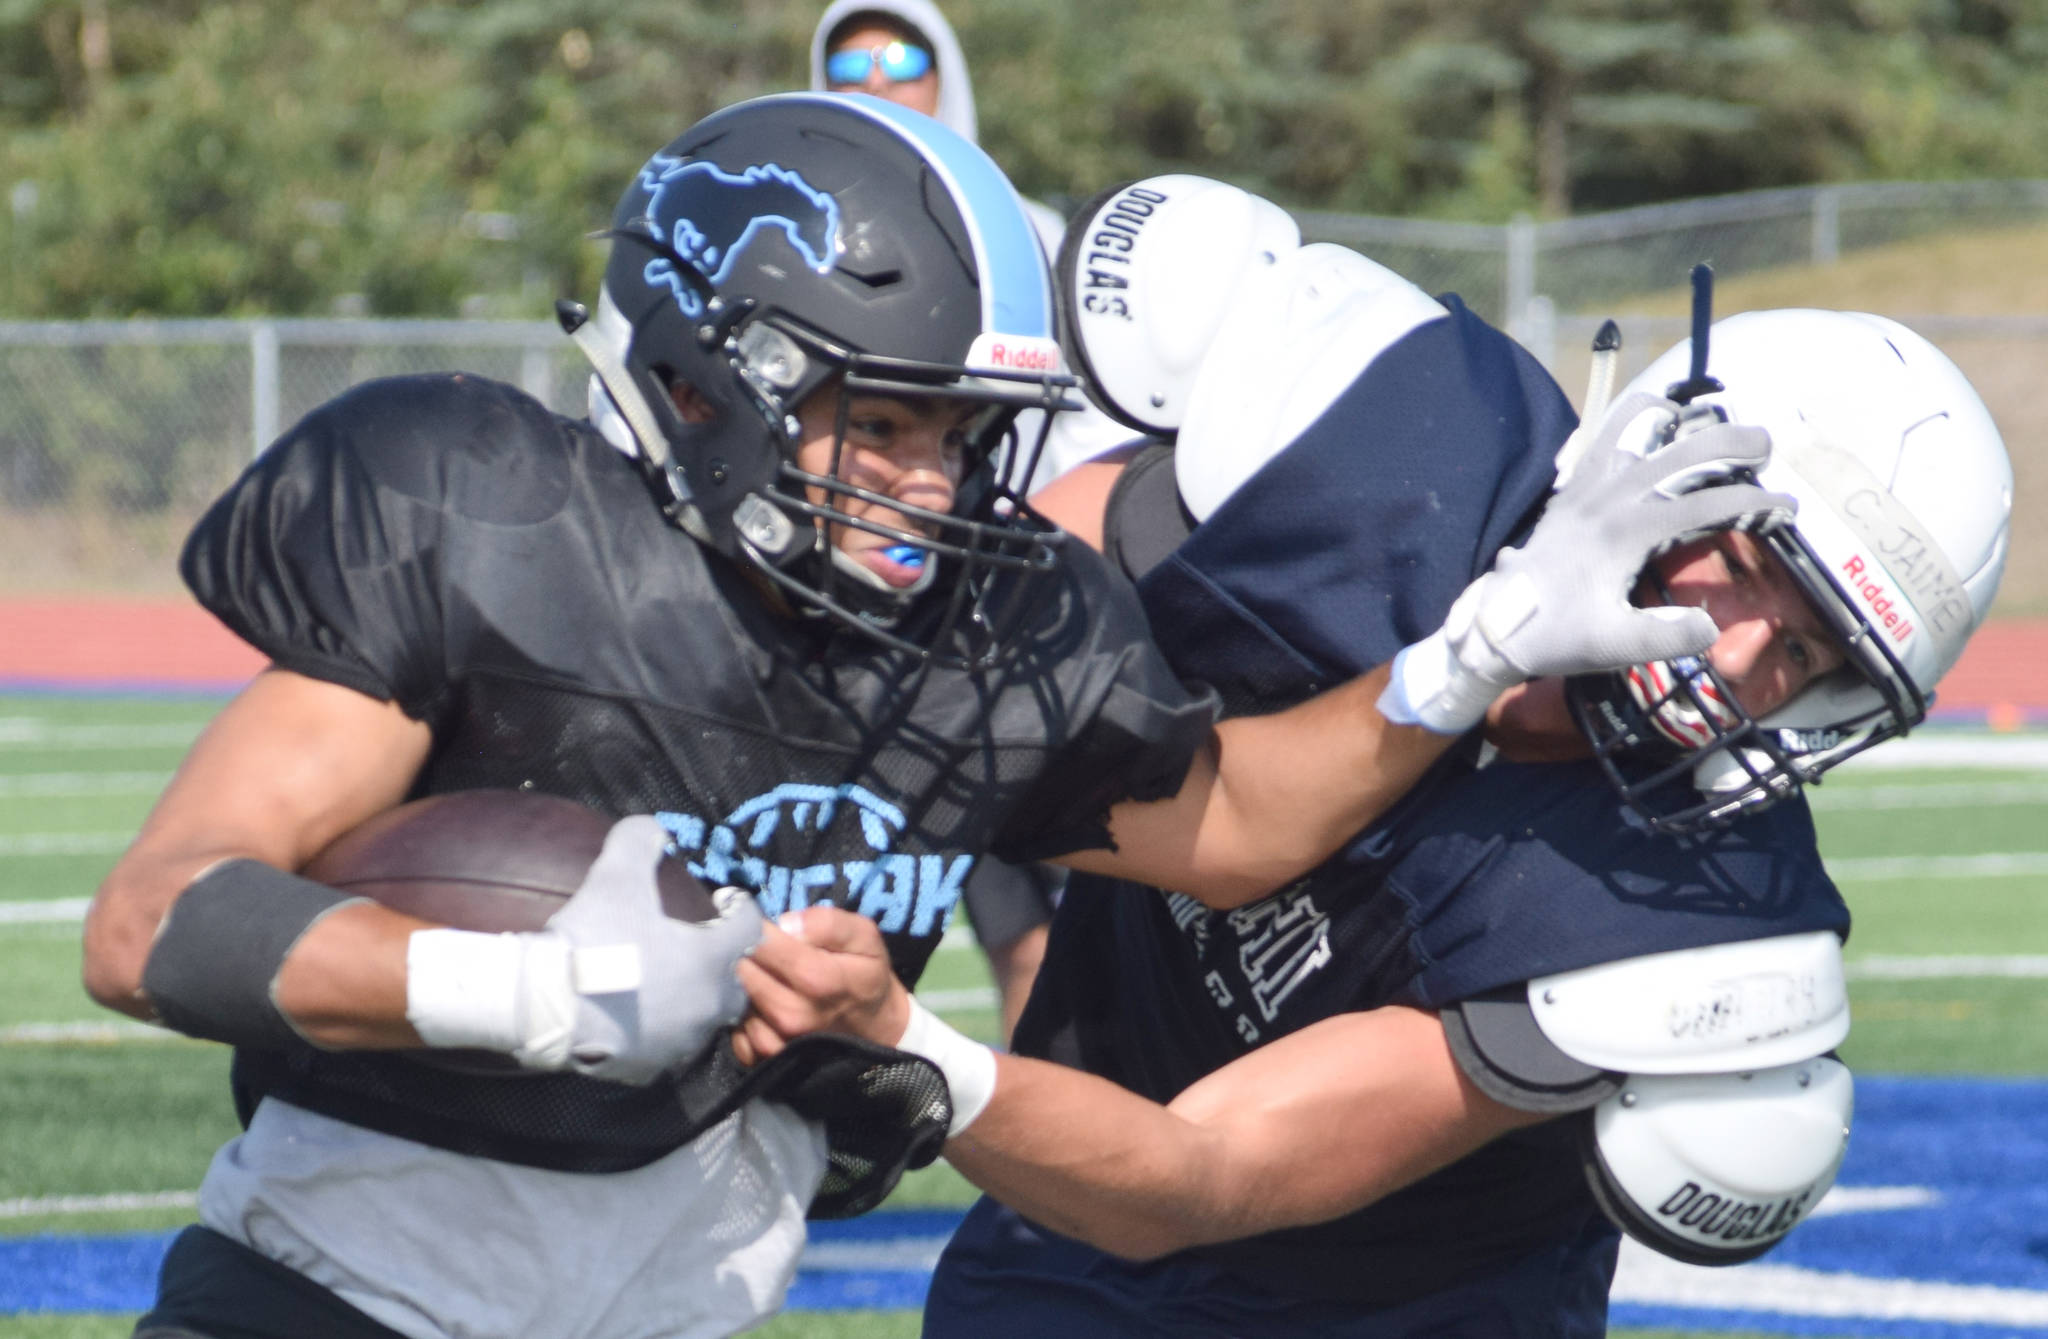 Photo by Jeff Helminiak/Peninsula Clarion                                 Chugiak’s Tyler Huffer stiff-arms Soldotna’s Hudson Metcalf during a scrimmage Saturday, Aug. 10, at Justin Maile Field in Soldotna.